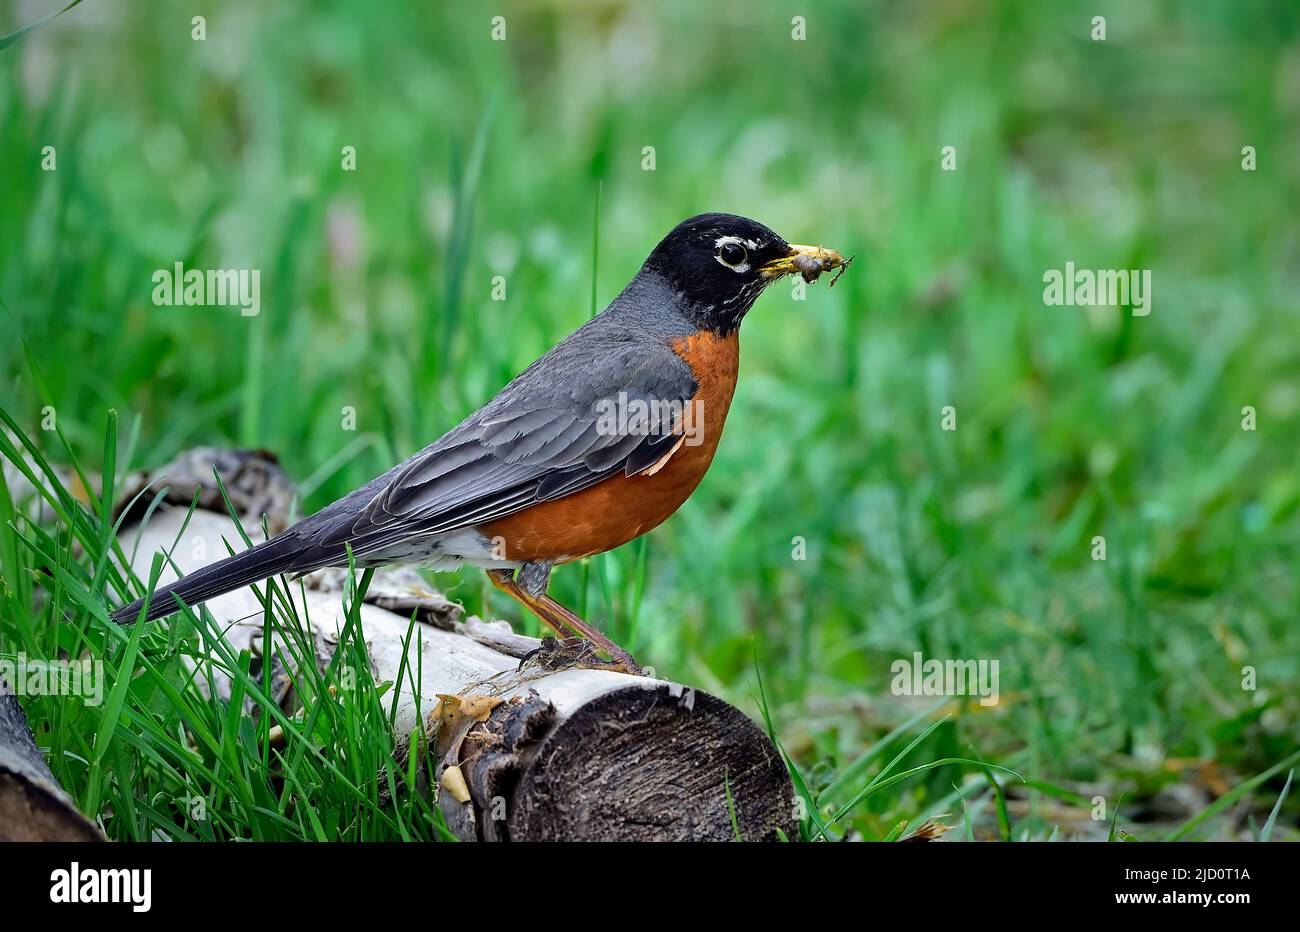 An adult American Robin with a bill full of catipillersperched on a fallen logagainst a green grass background. Stock Photo